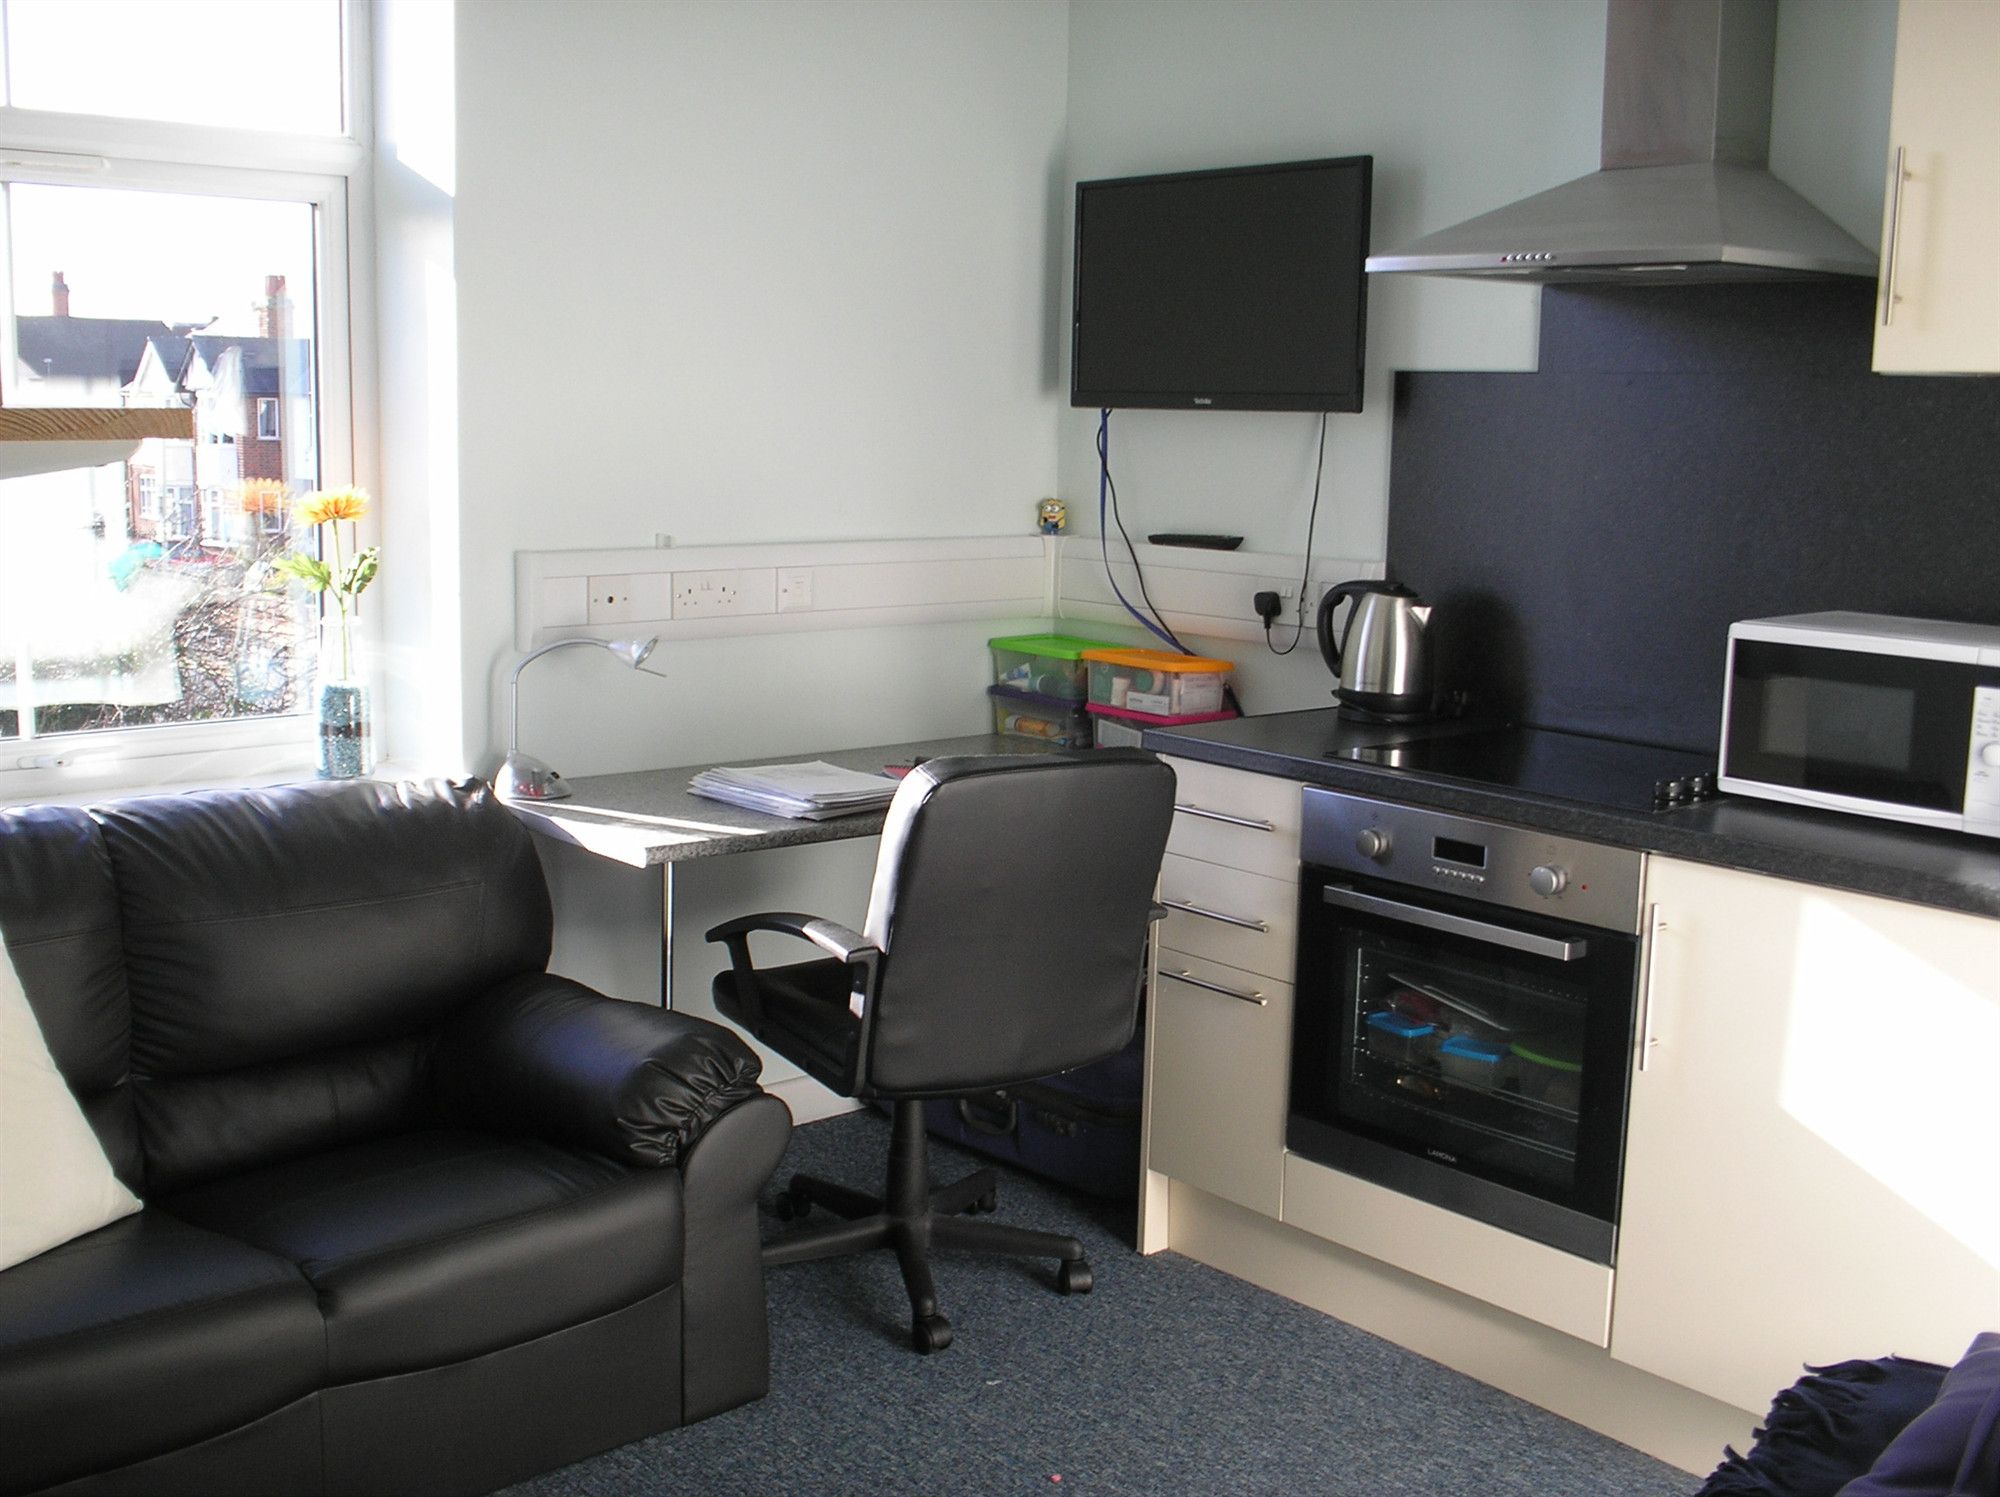 Radmoor House Student Accommodation in Loughborough - Quality en-suite rooms